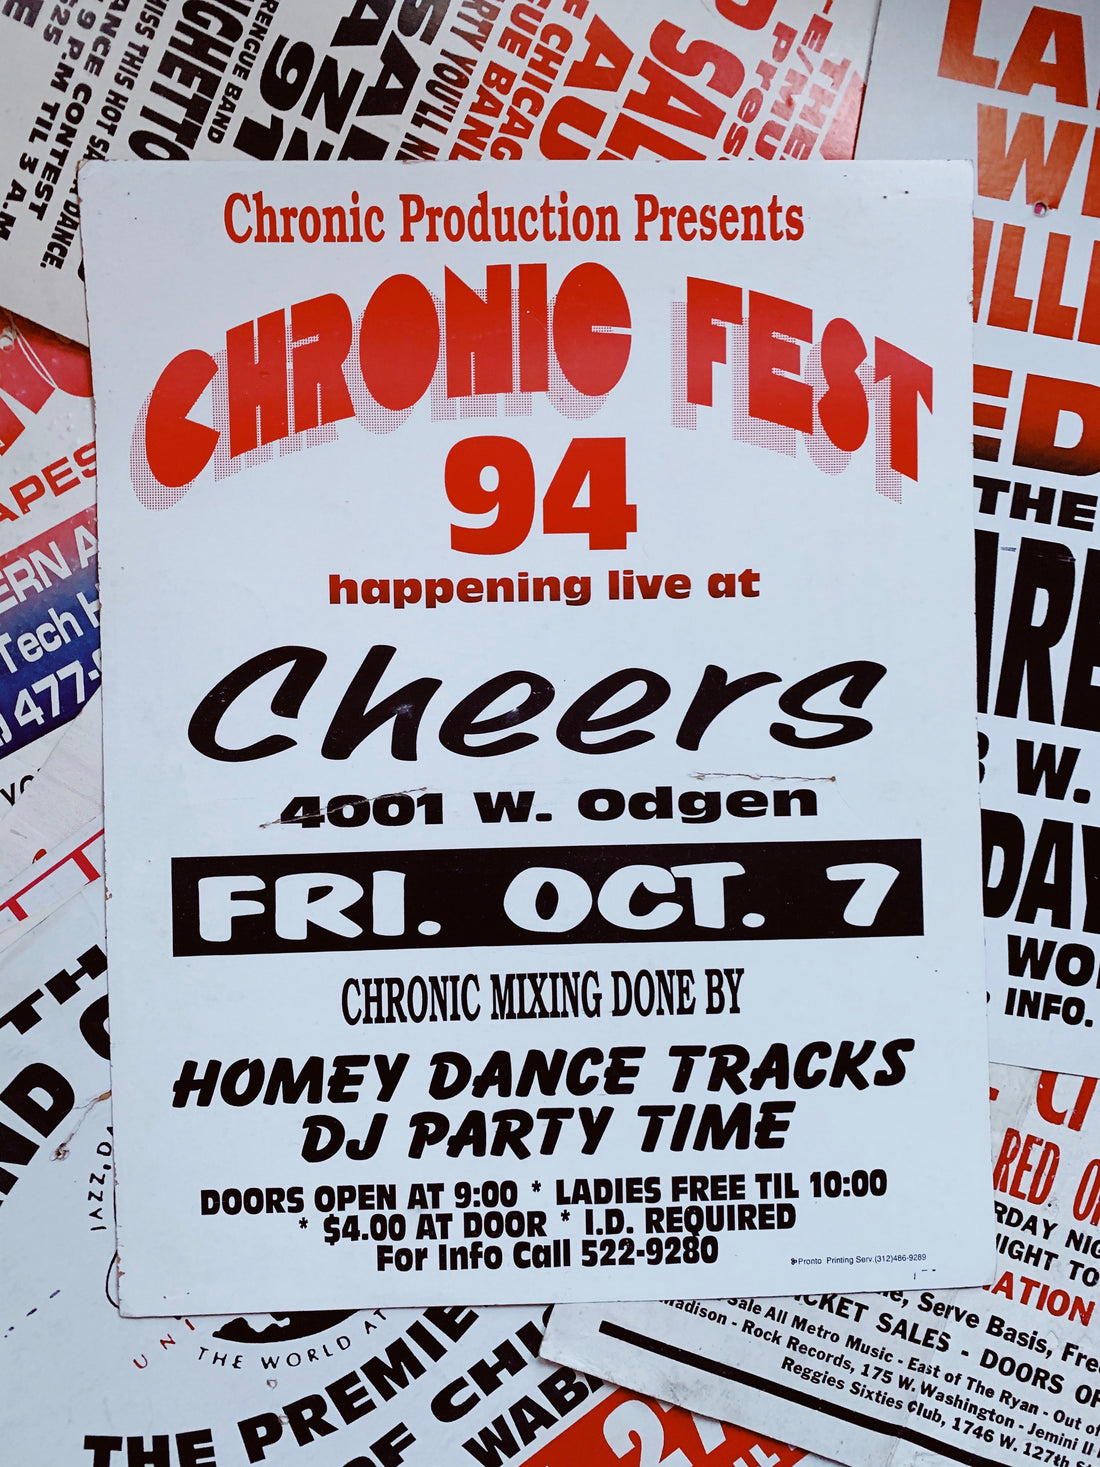 Original Chicago House Party Poster (1990’s)